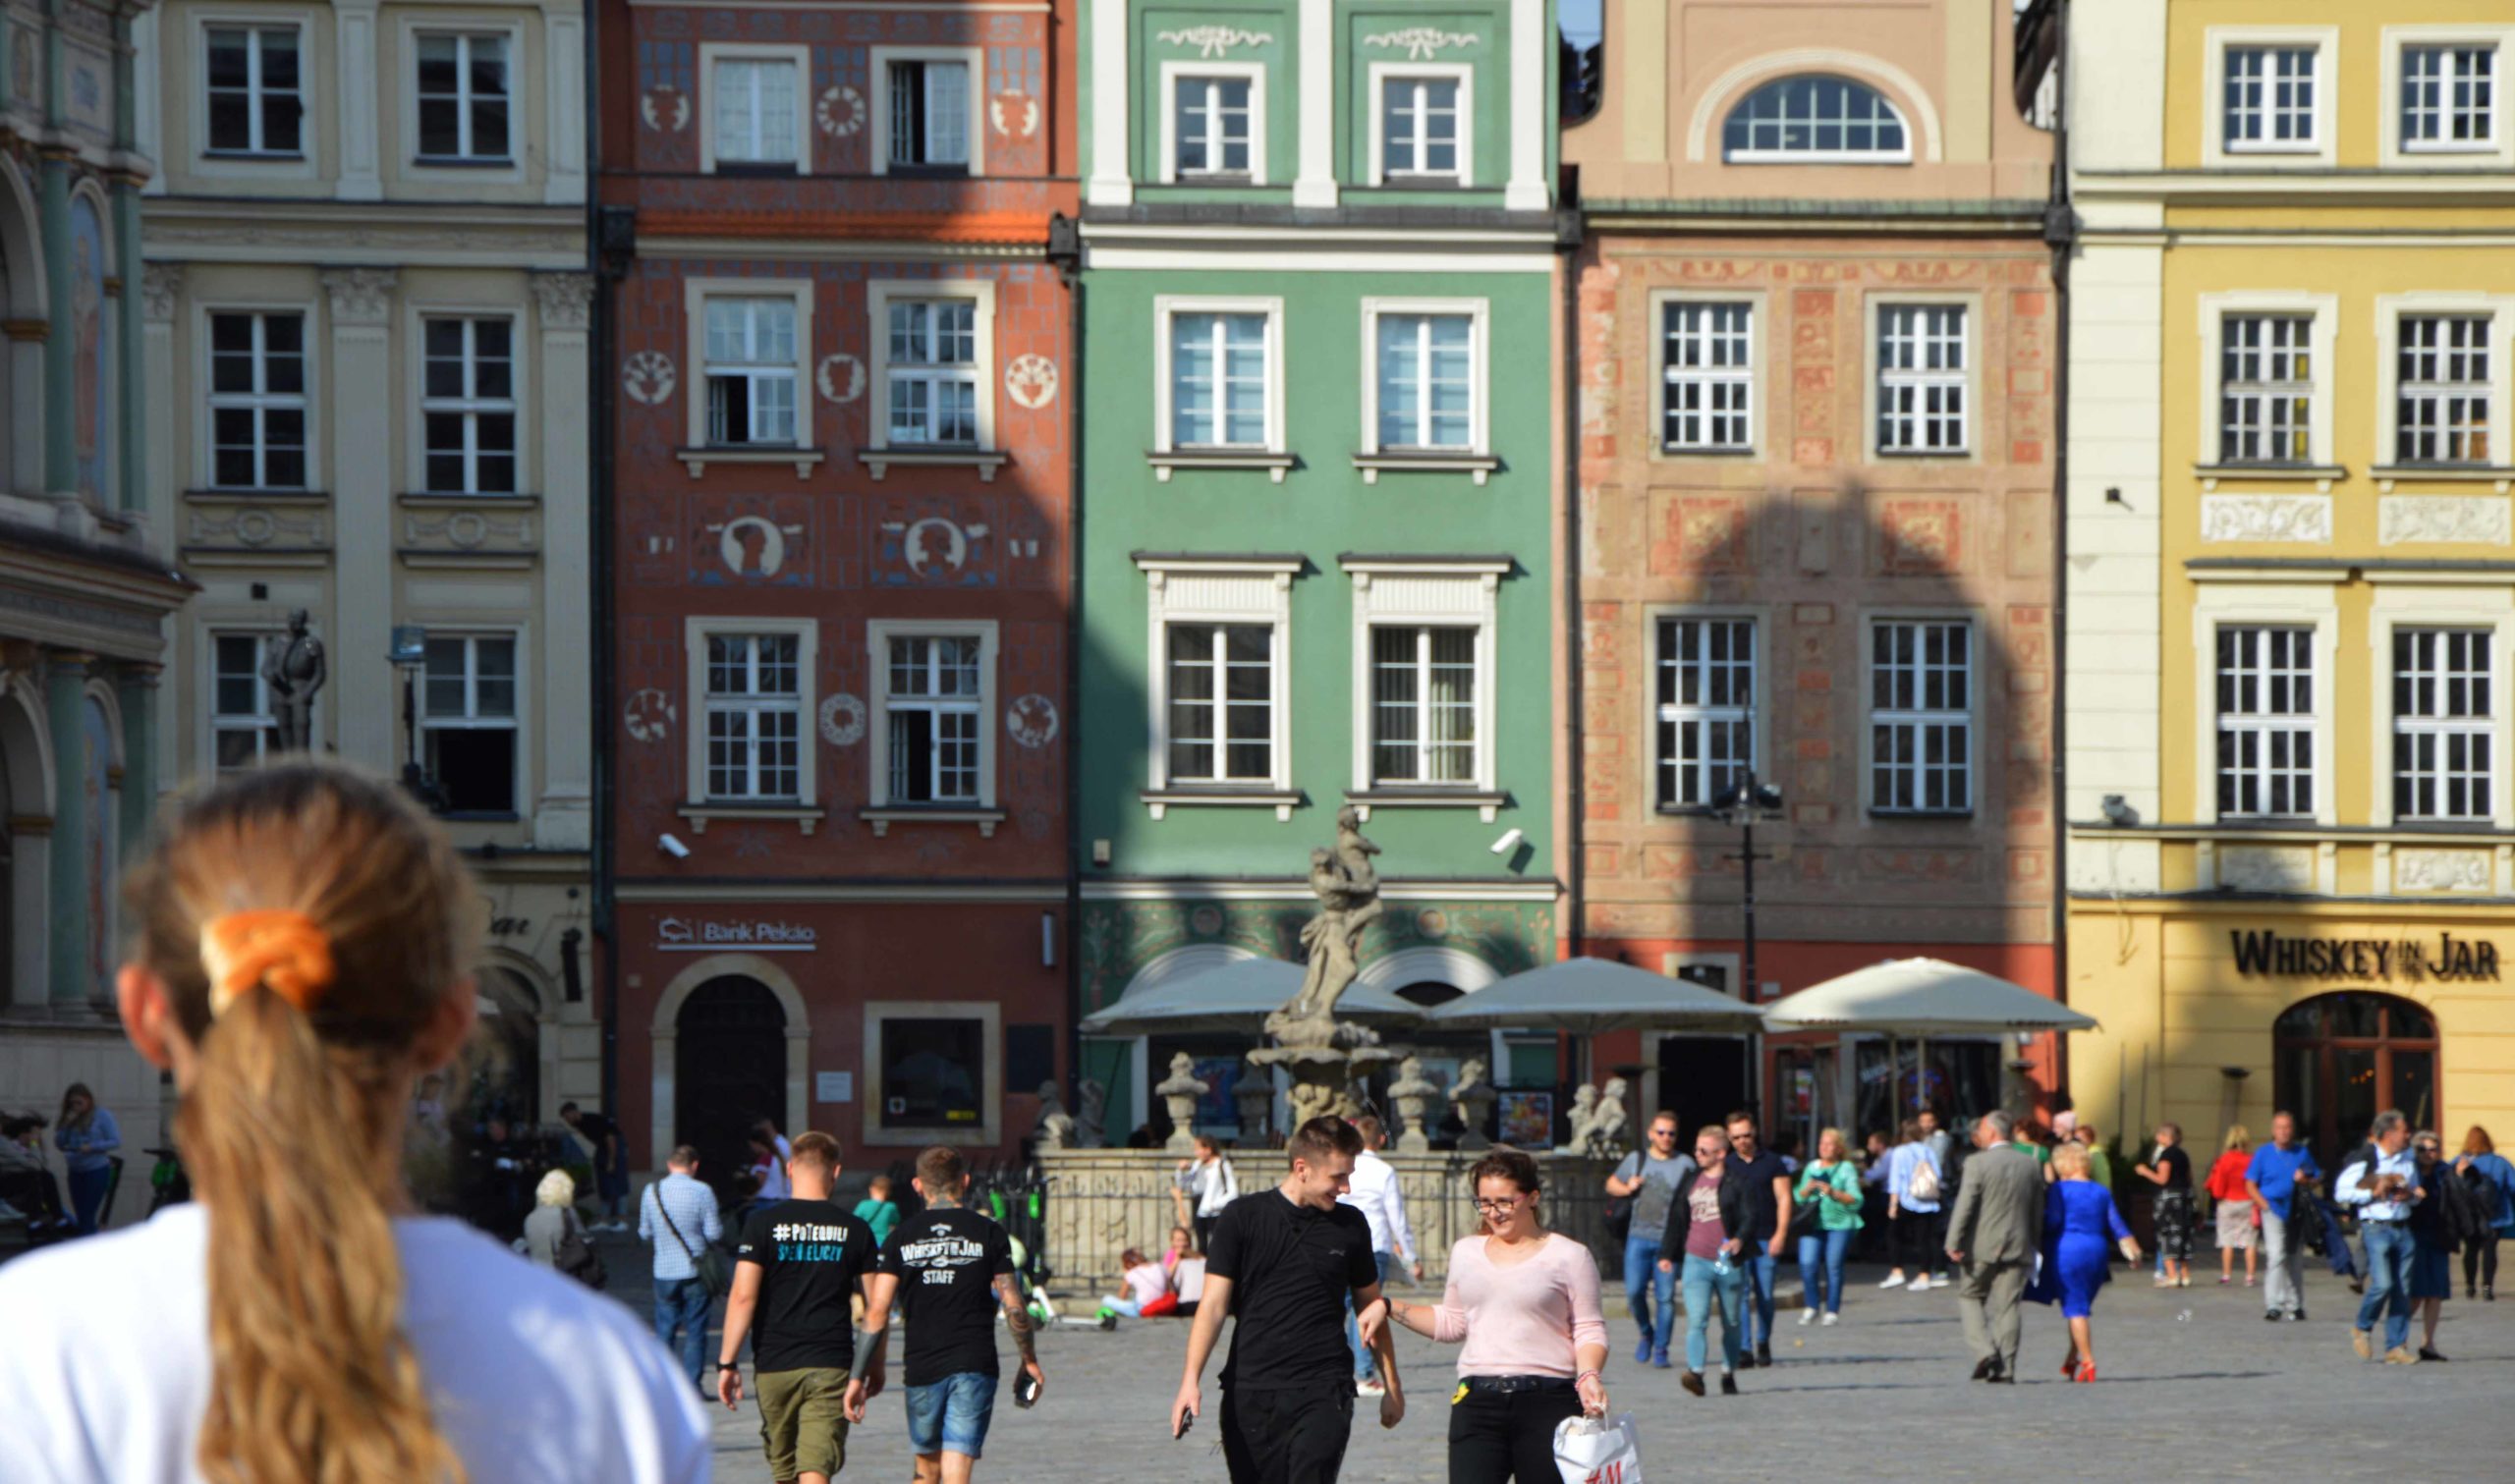 Photograph from The old market square in Poznan